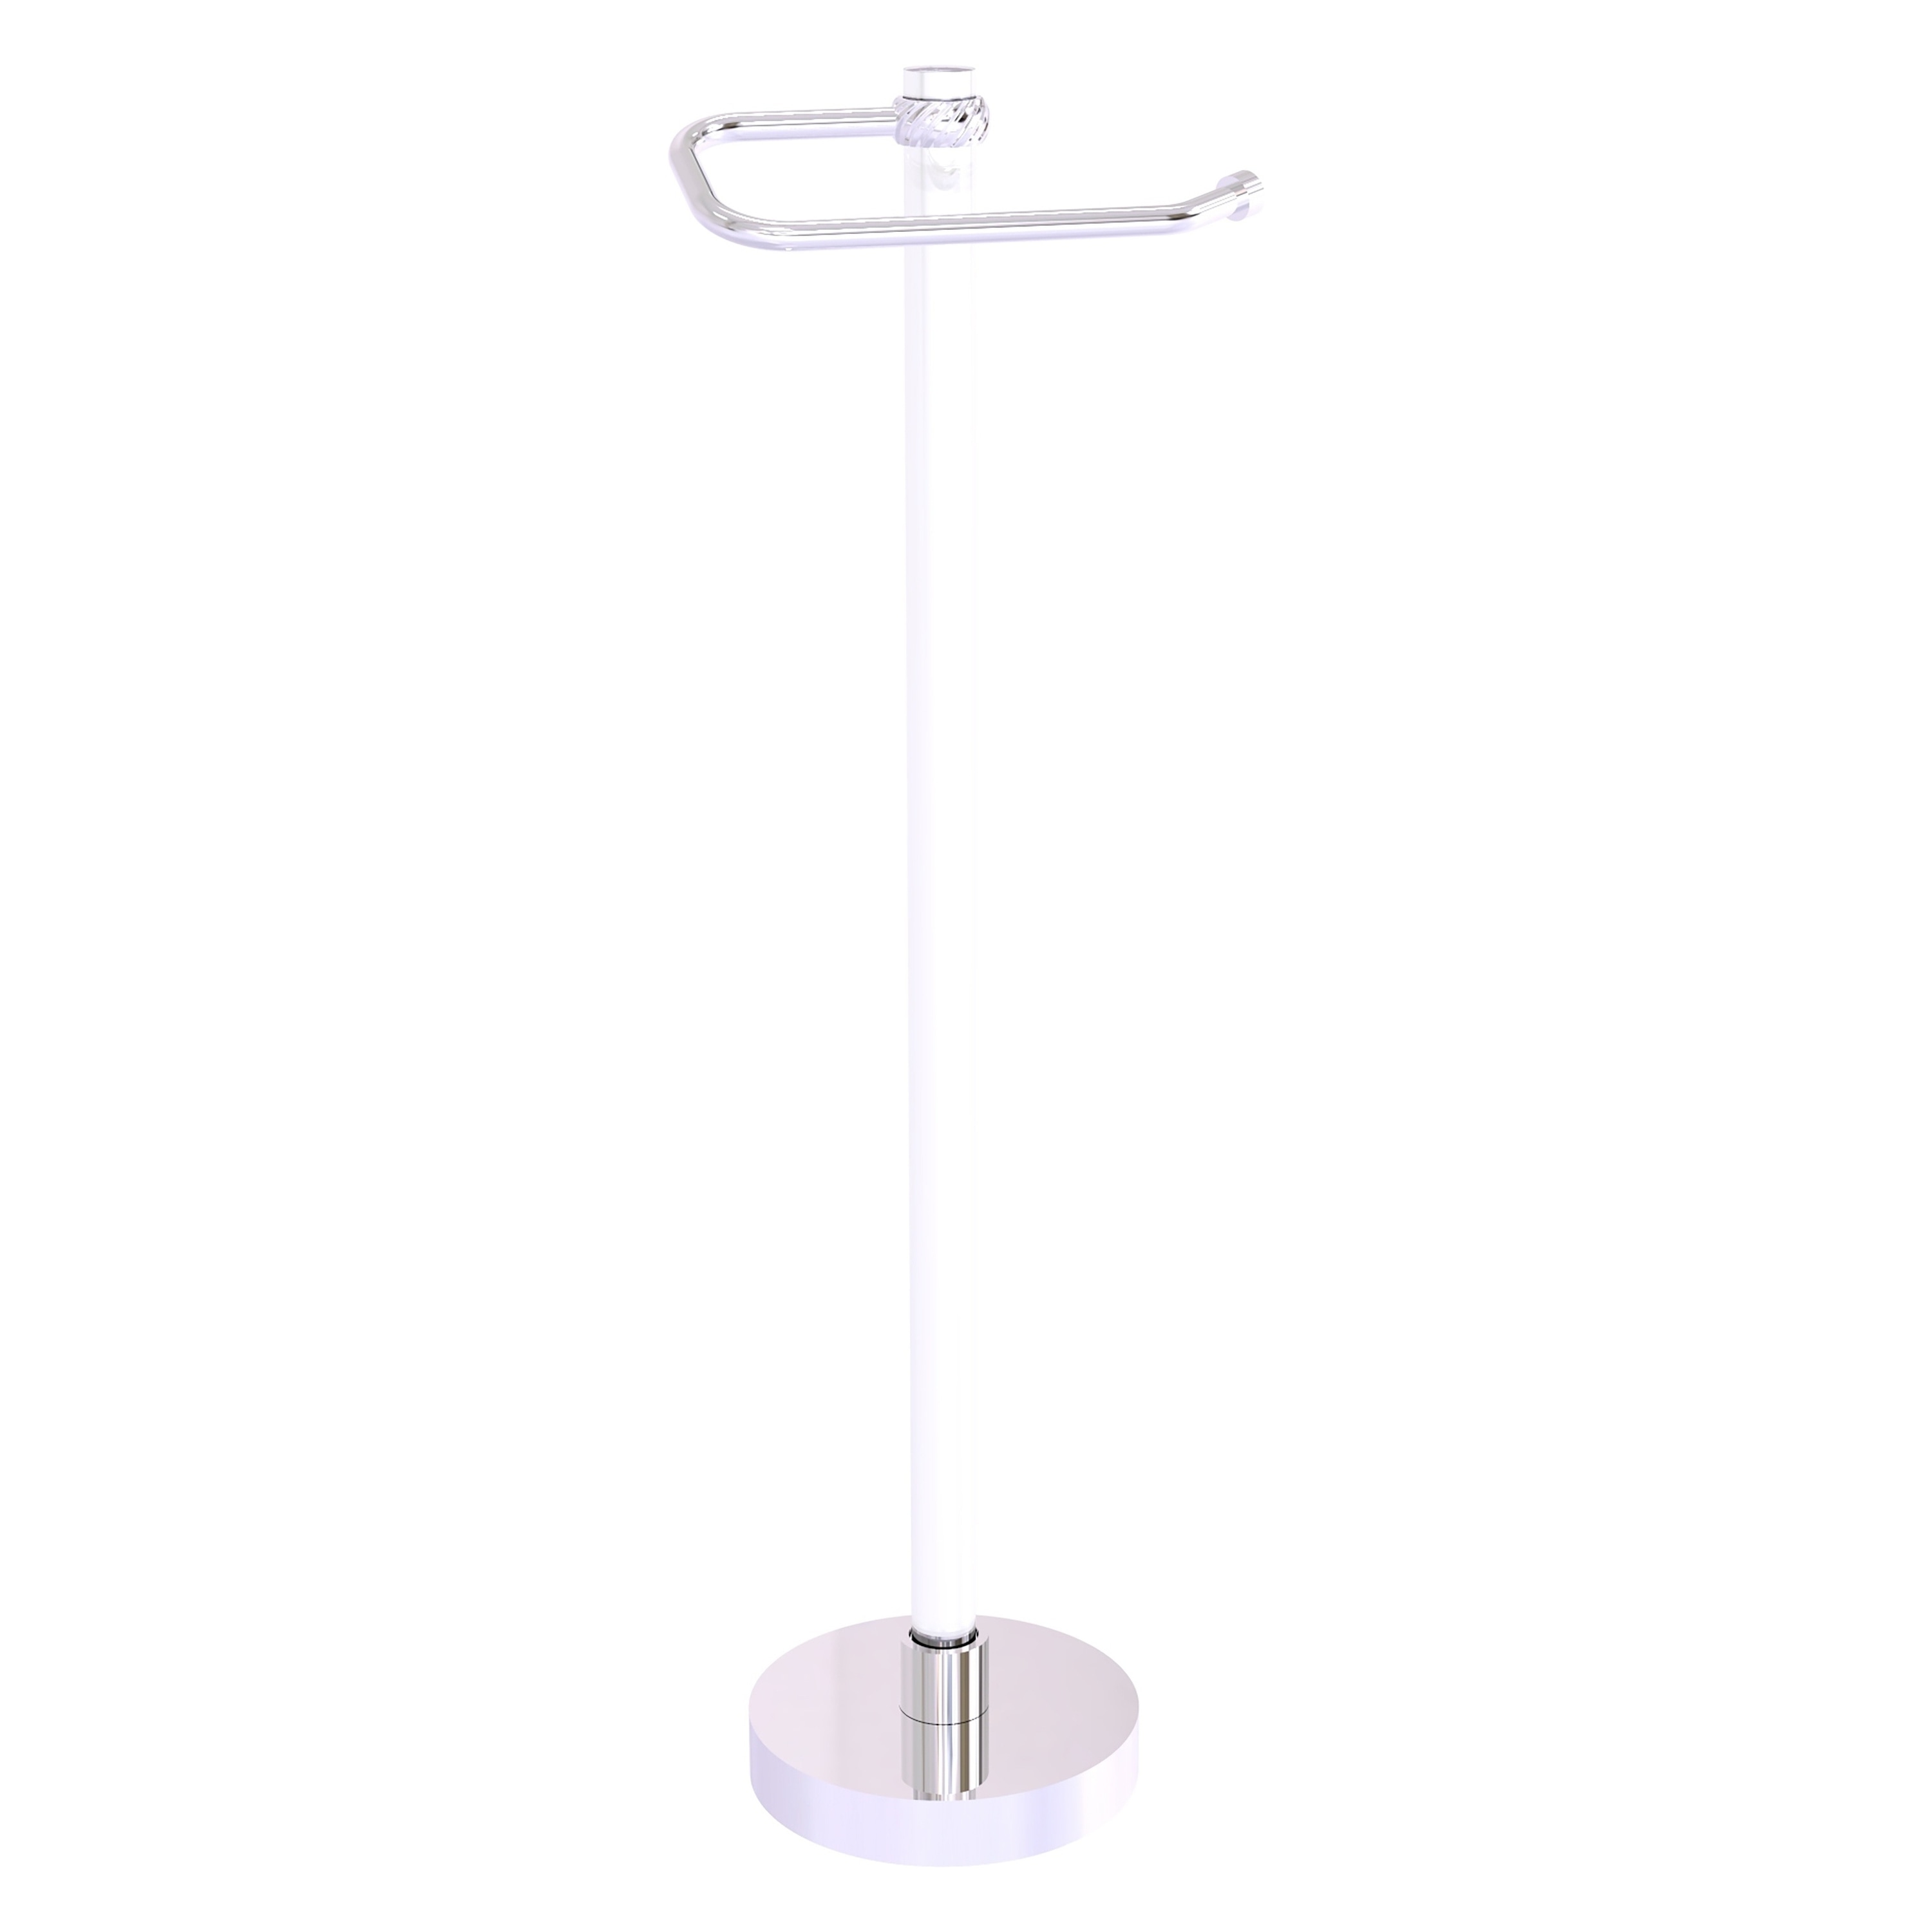 DW 6700, Freestanding Toilet Paper Holder and Toilet Brush Set in Polished  Chrome